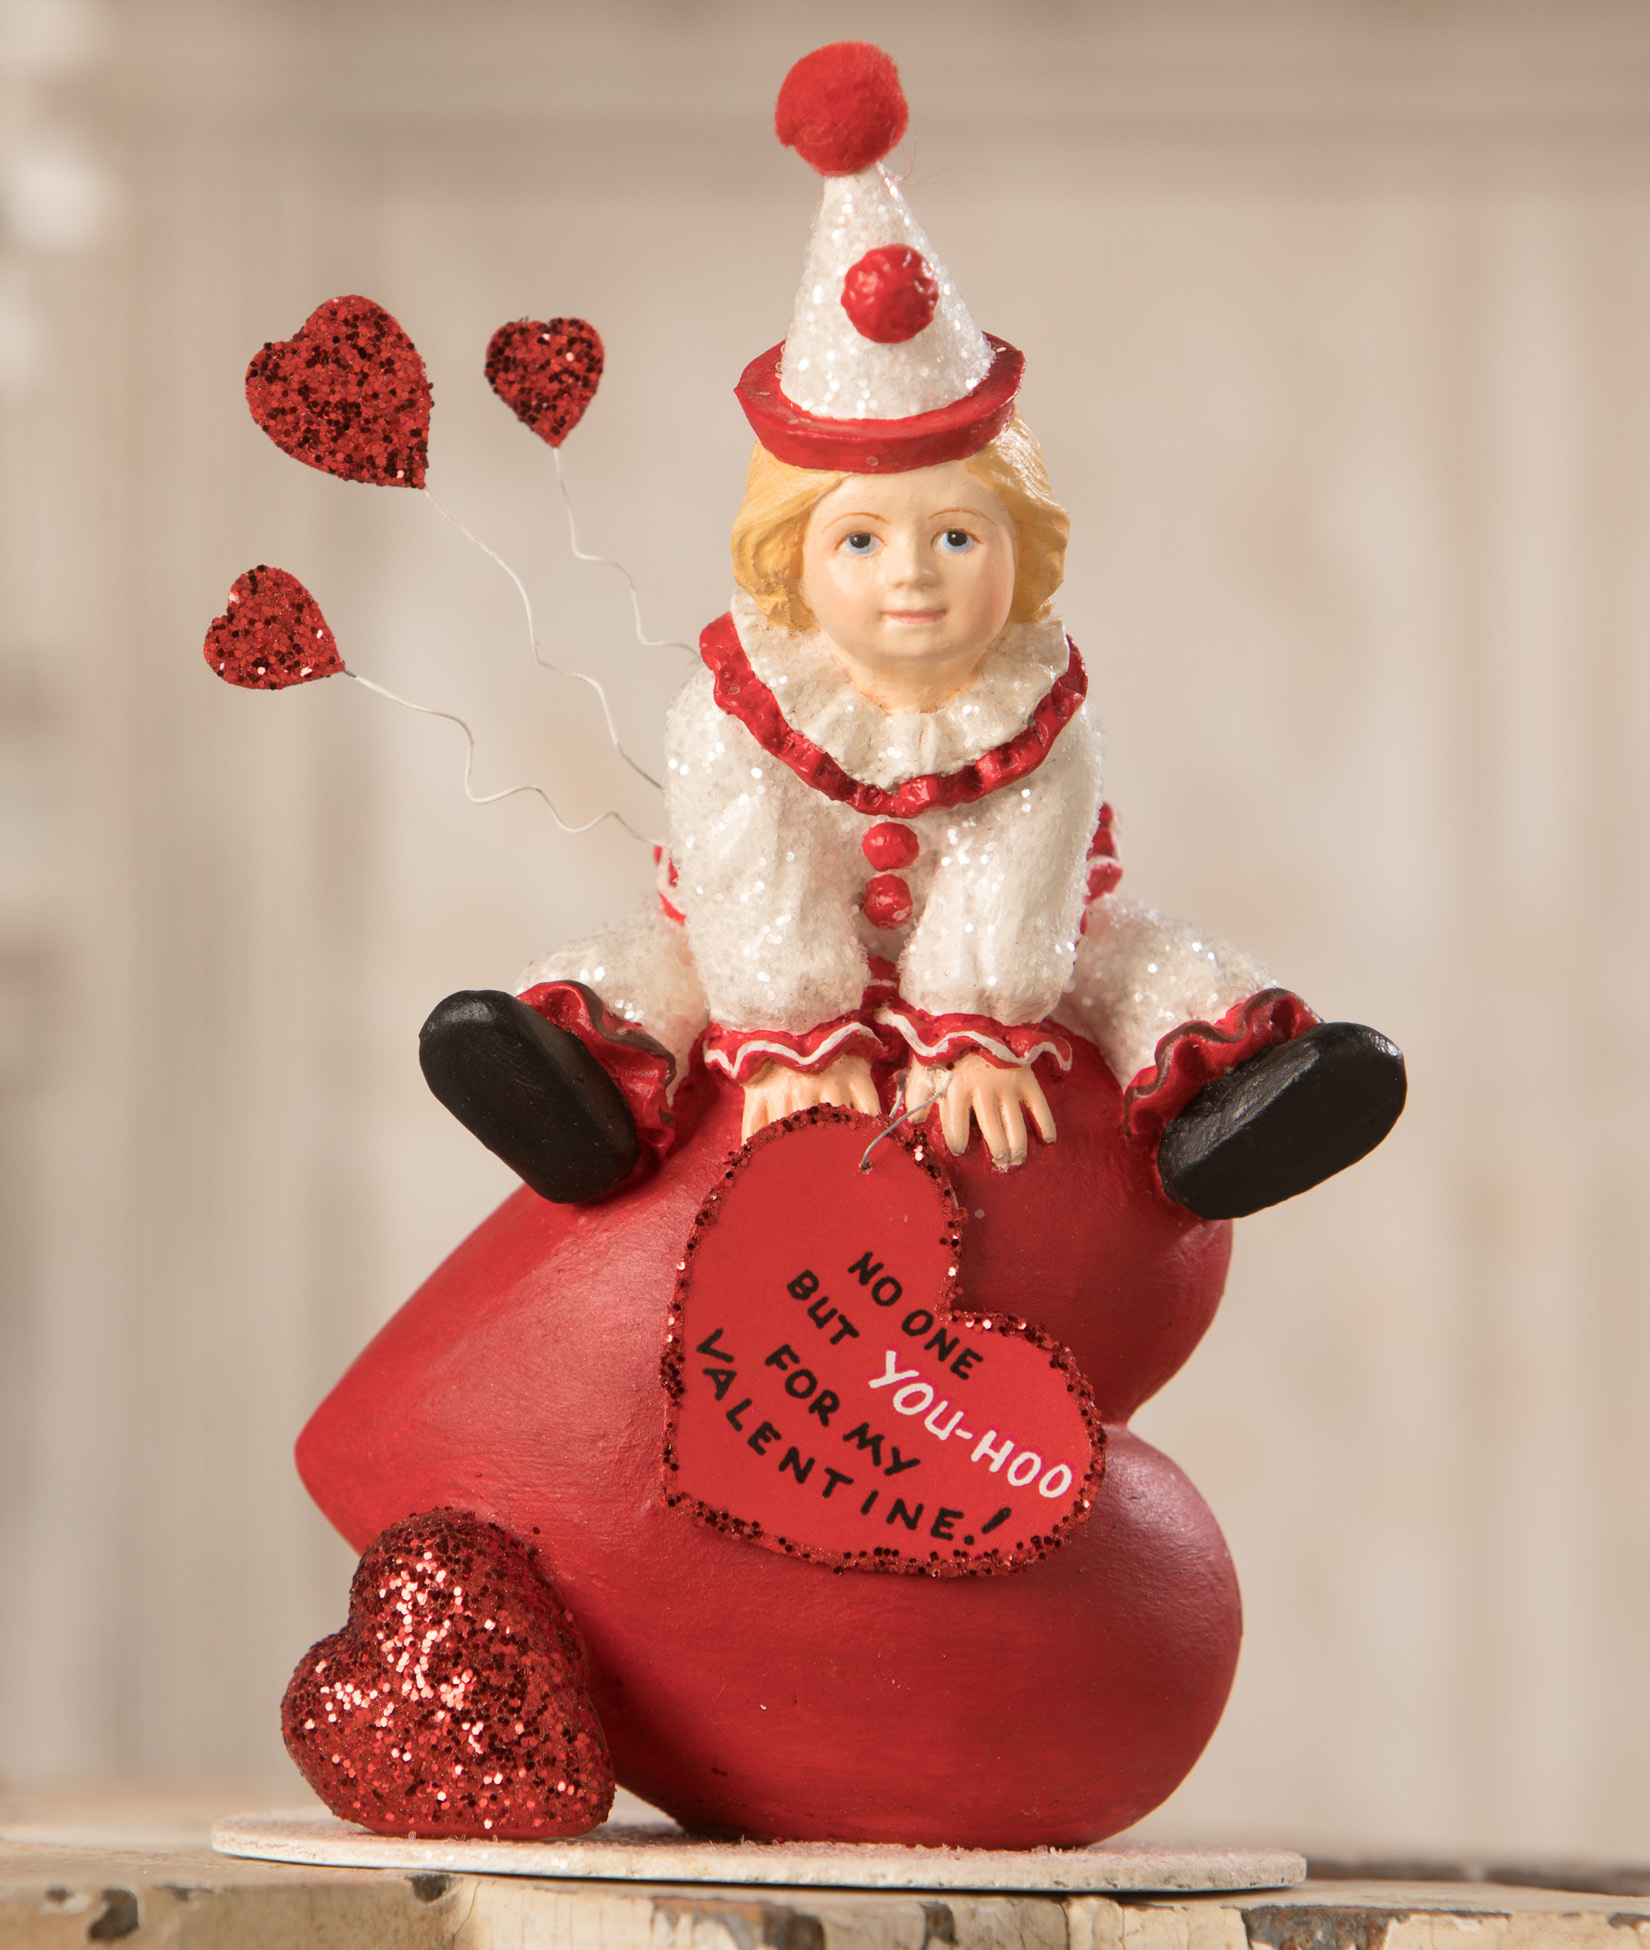 21" Large Bethany Lowe Red Clown Girl Retro Vntg Valentines Day Figurine Decor